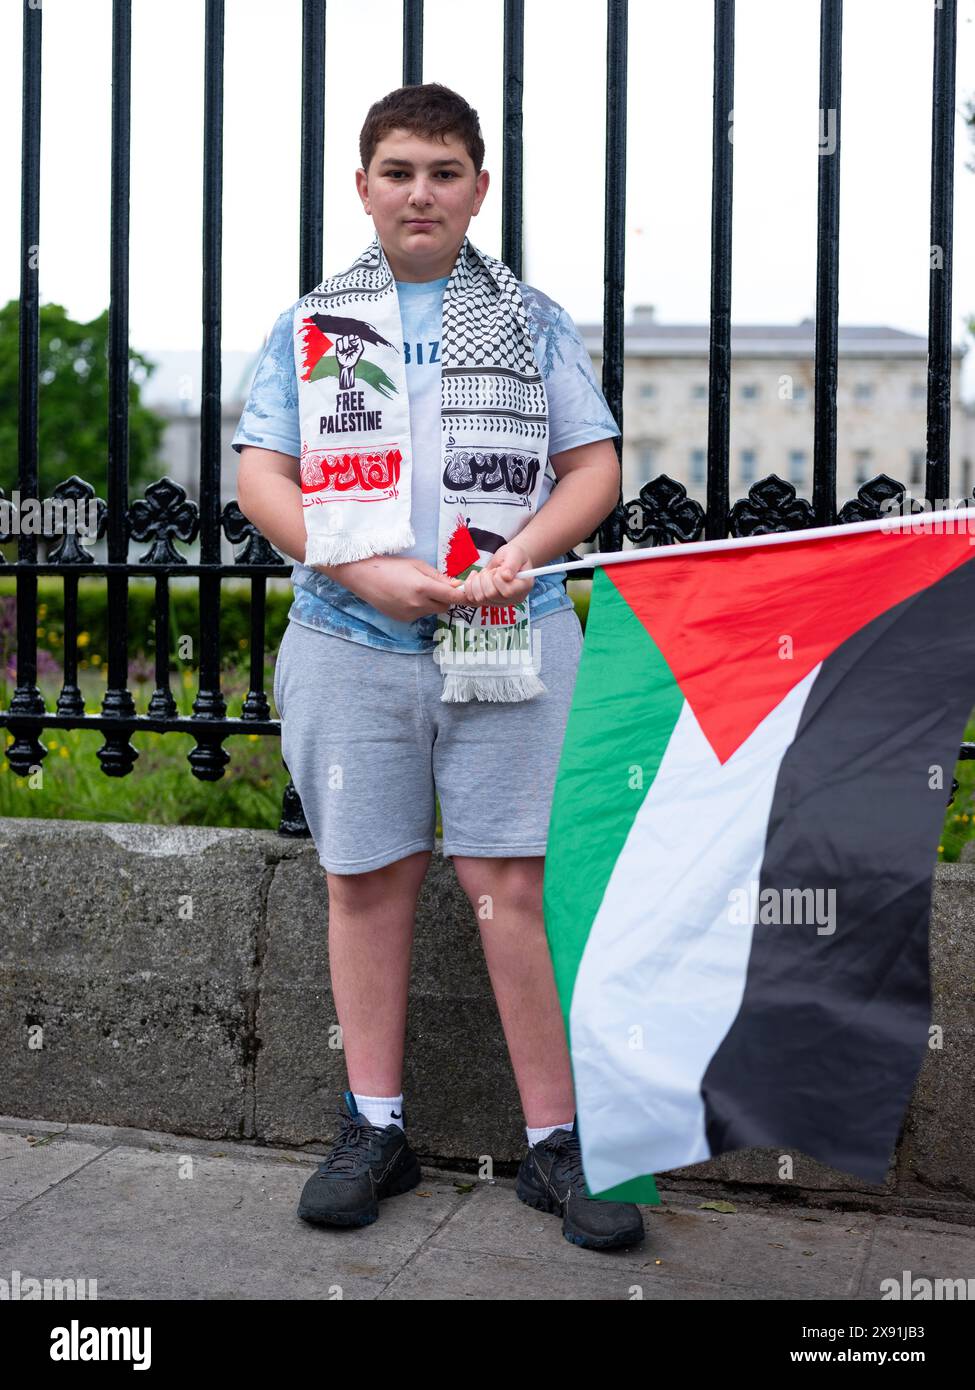 Pro Palestinian protesters outside the Dáil Éireann on Kildare Street in Dublin city, as Ireland officially recognised the Palestinian state. Stock Photo